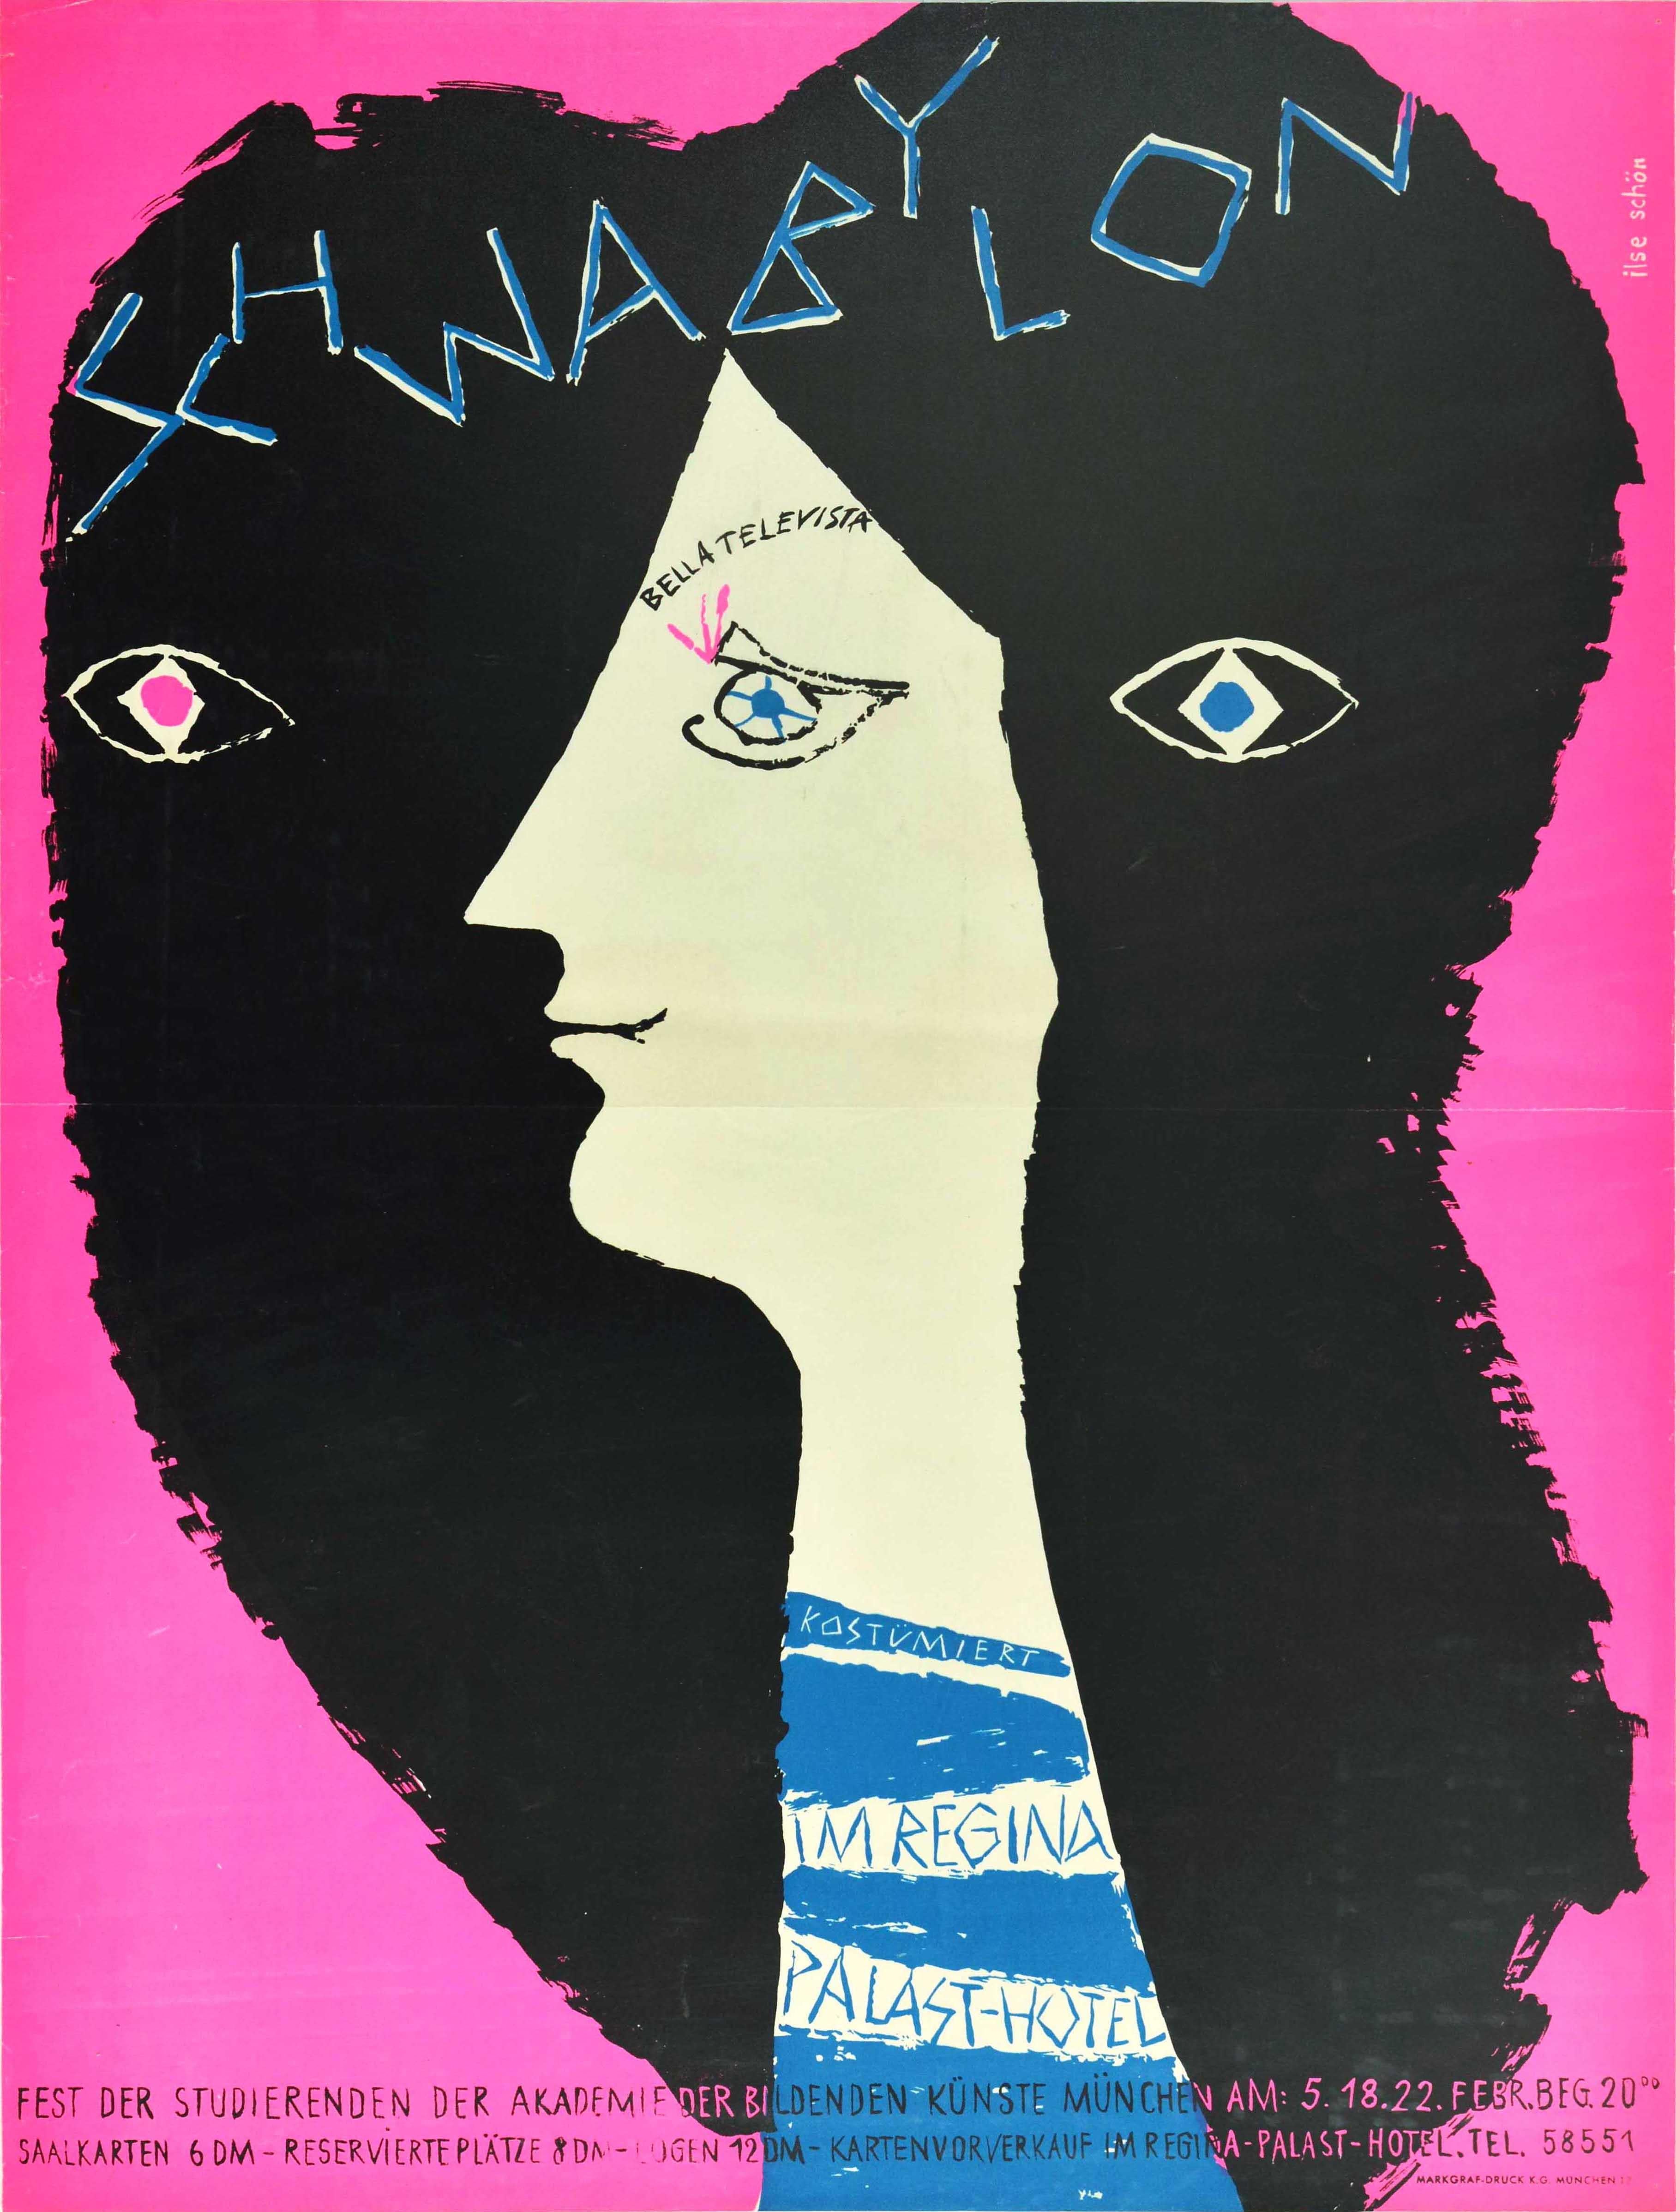 Original vintage advertising poster for the Munich Academy of Fine Arts carnival festival Schwabylon at The Regina Palast Hotel / Schwabylon Bella Televista kostumiert Im Regina Palast-Hotel featuring an abstract illustration of a lady with the